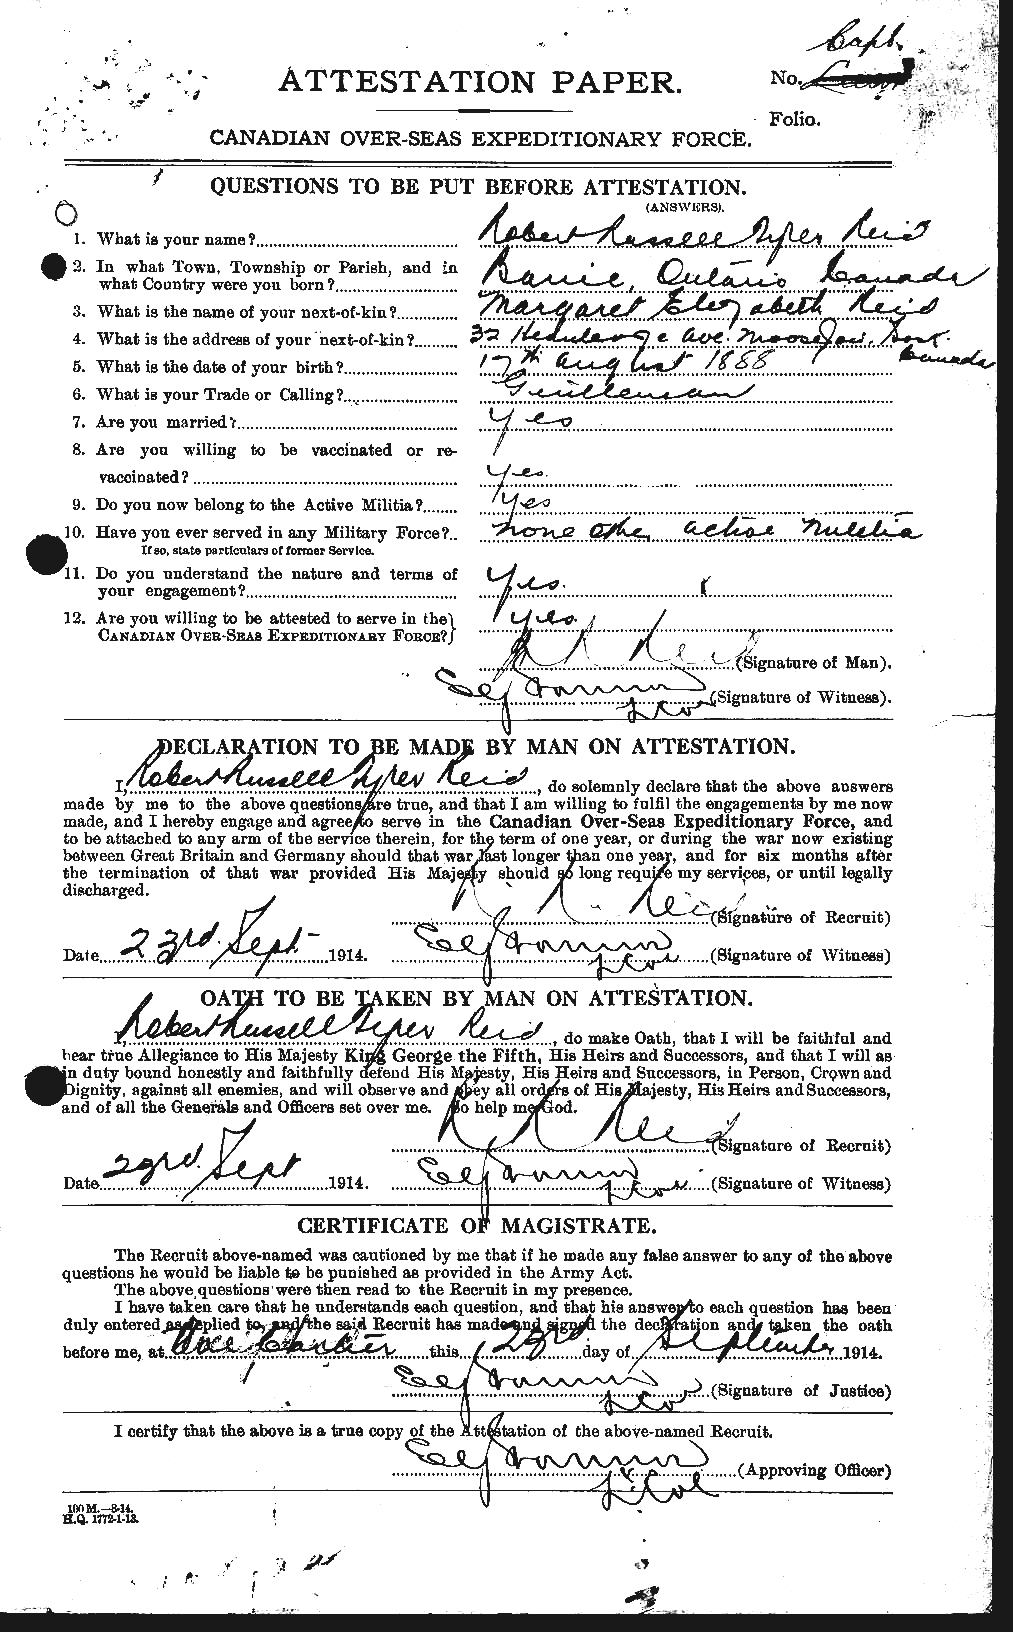 Personnel Records of the First World War - CEF 601920a